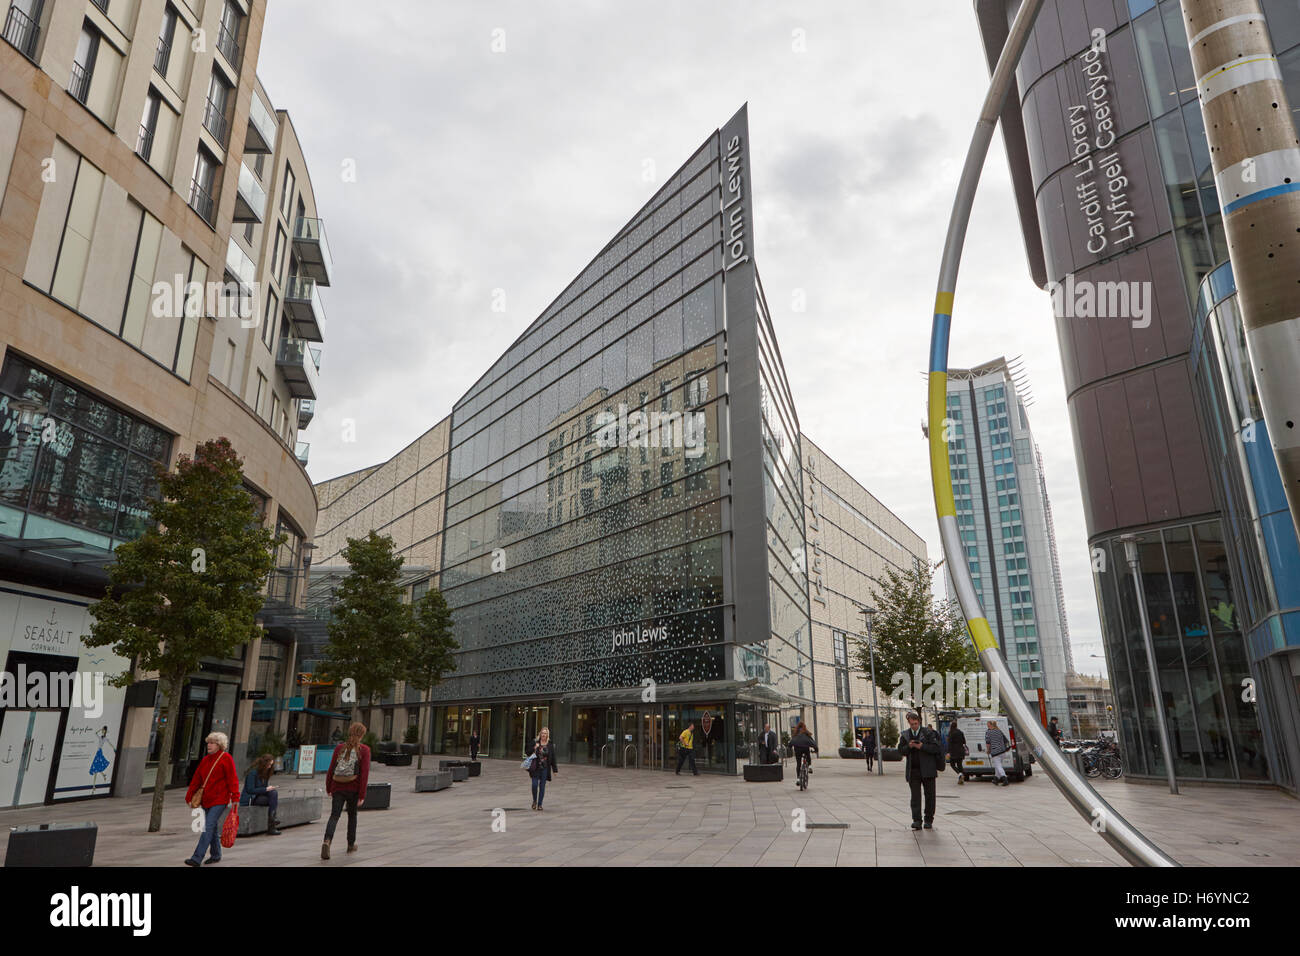 john lewis store in st davids dewi sant shopping area of Cardiff Wales United Kingdom Stock Photo